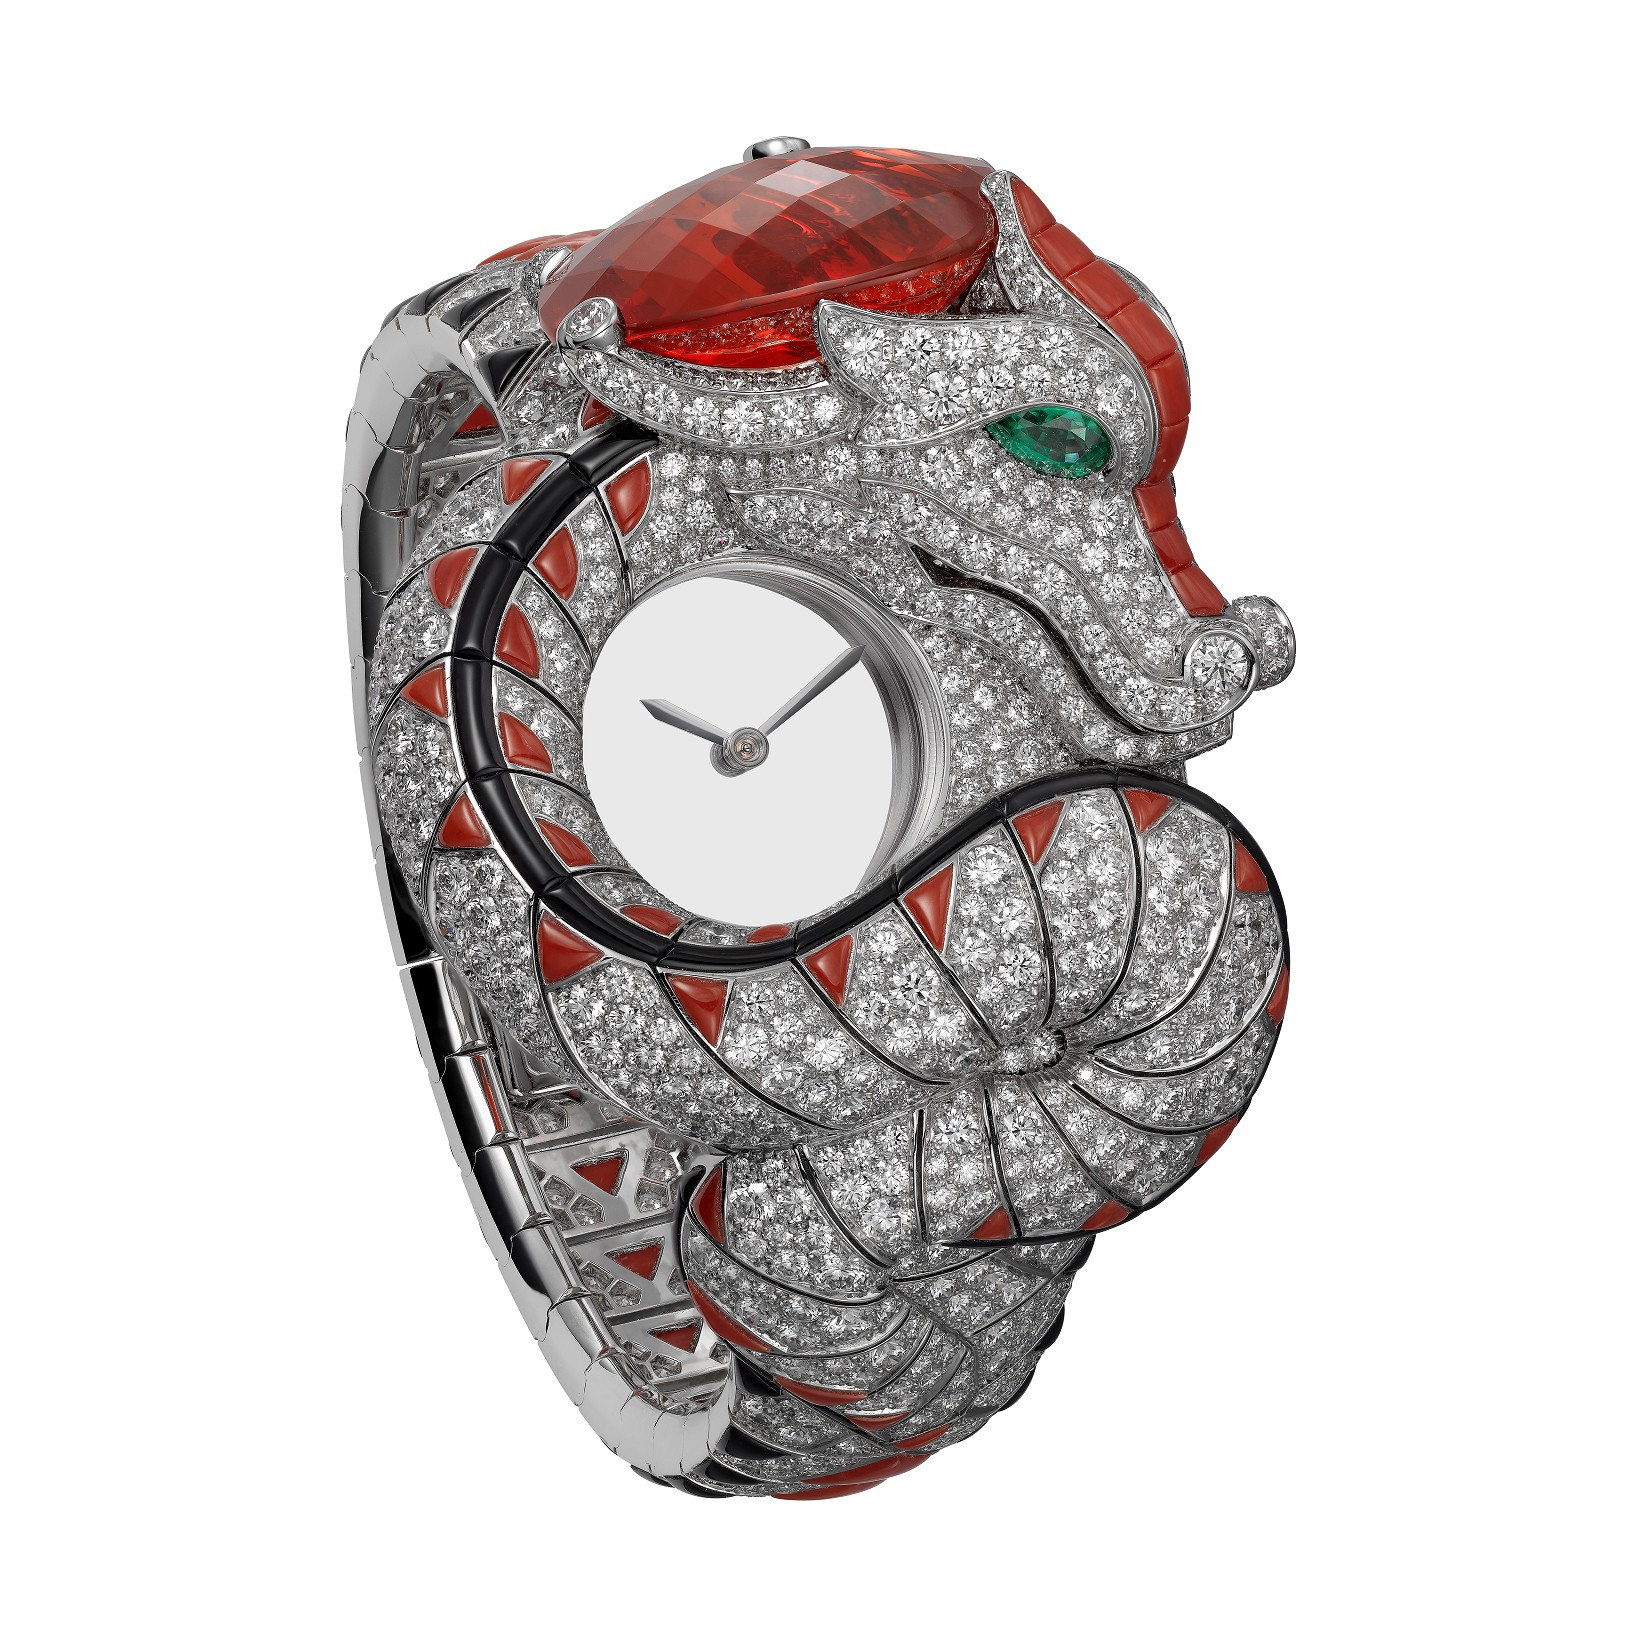 This Cartier dragon watch will make you 